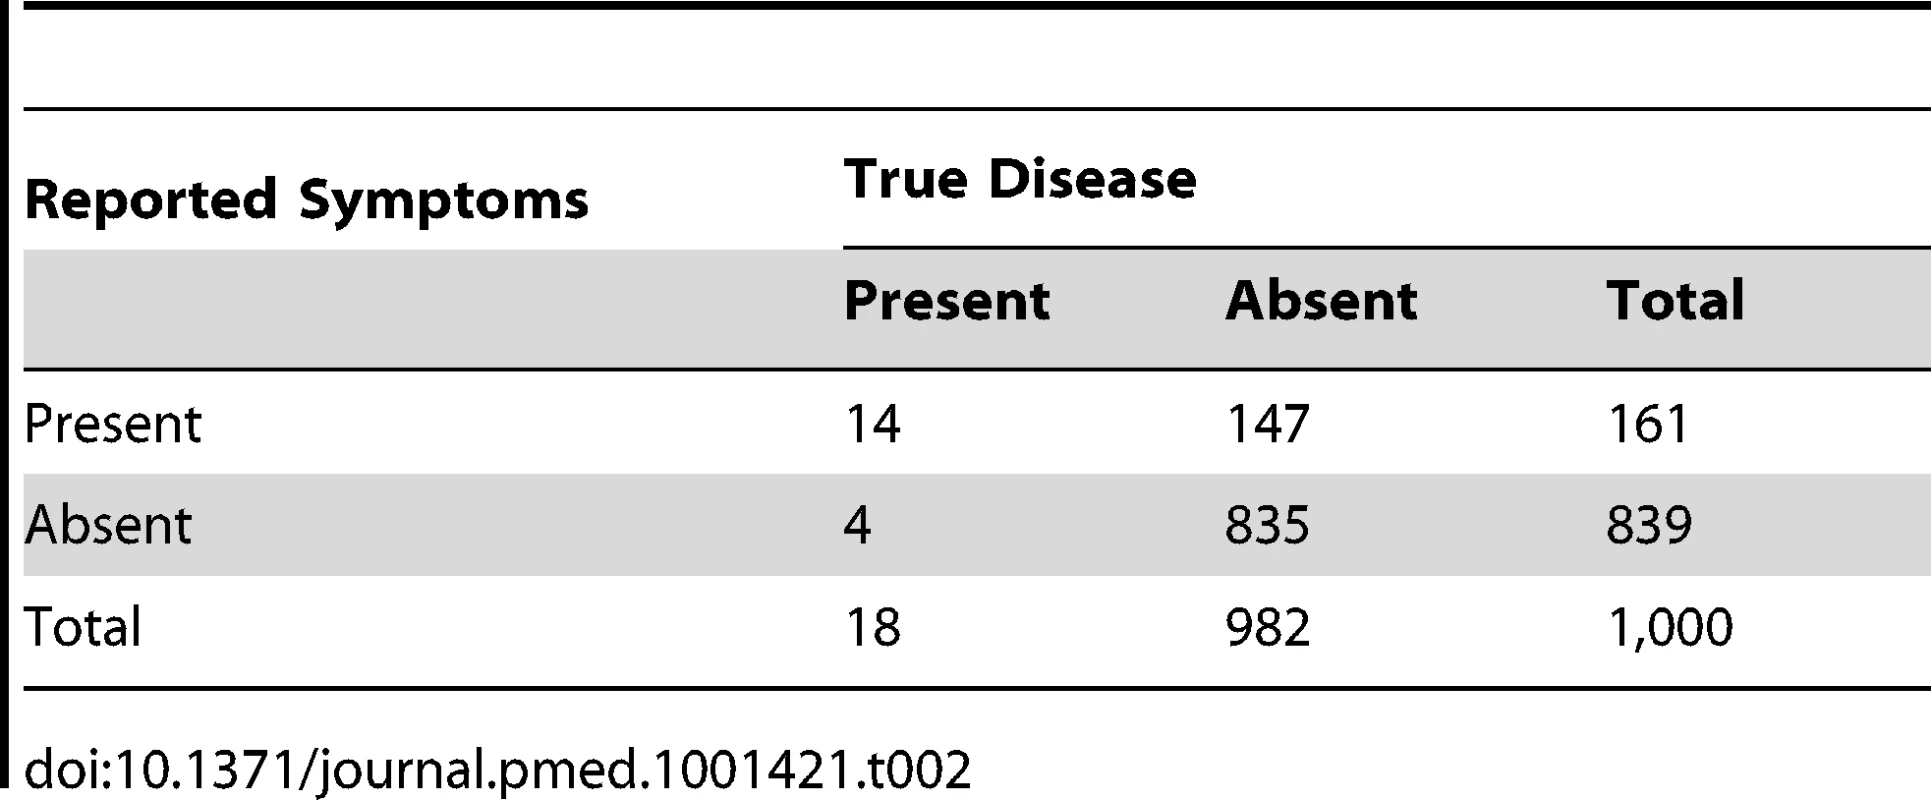 Distribution of cases of “true pneumonia” according to caregiver report of “suspected pneumonia” (test) and true disease status when test sensitivity is 80% and specificity is 85%.